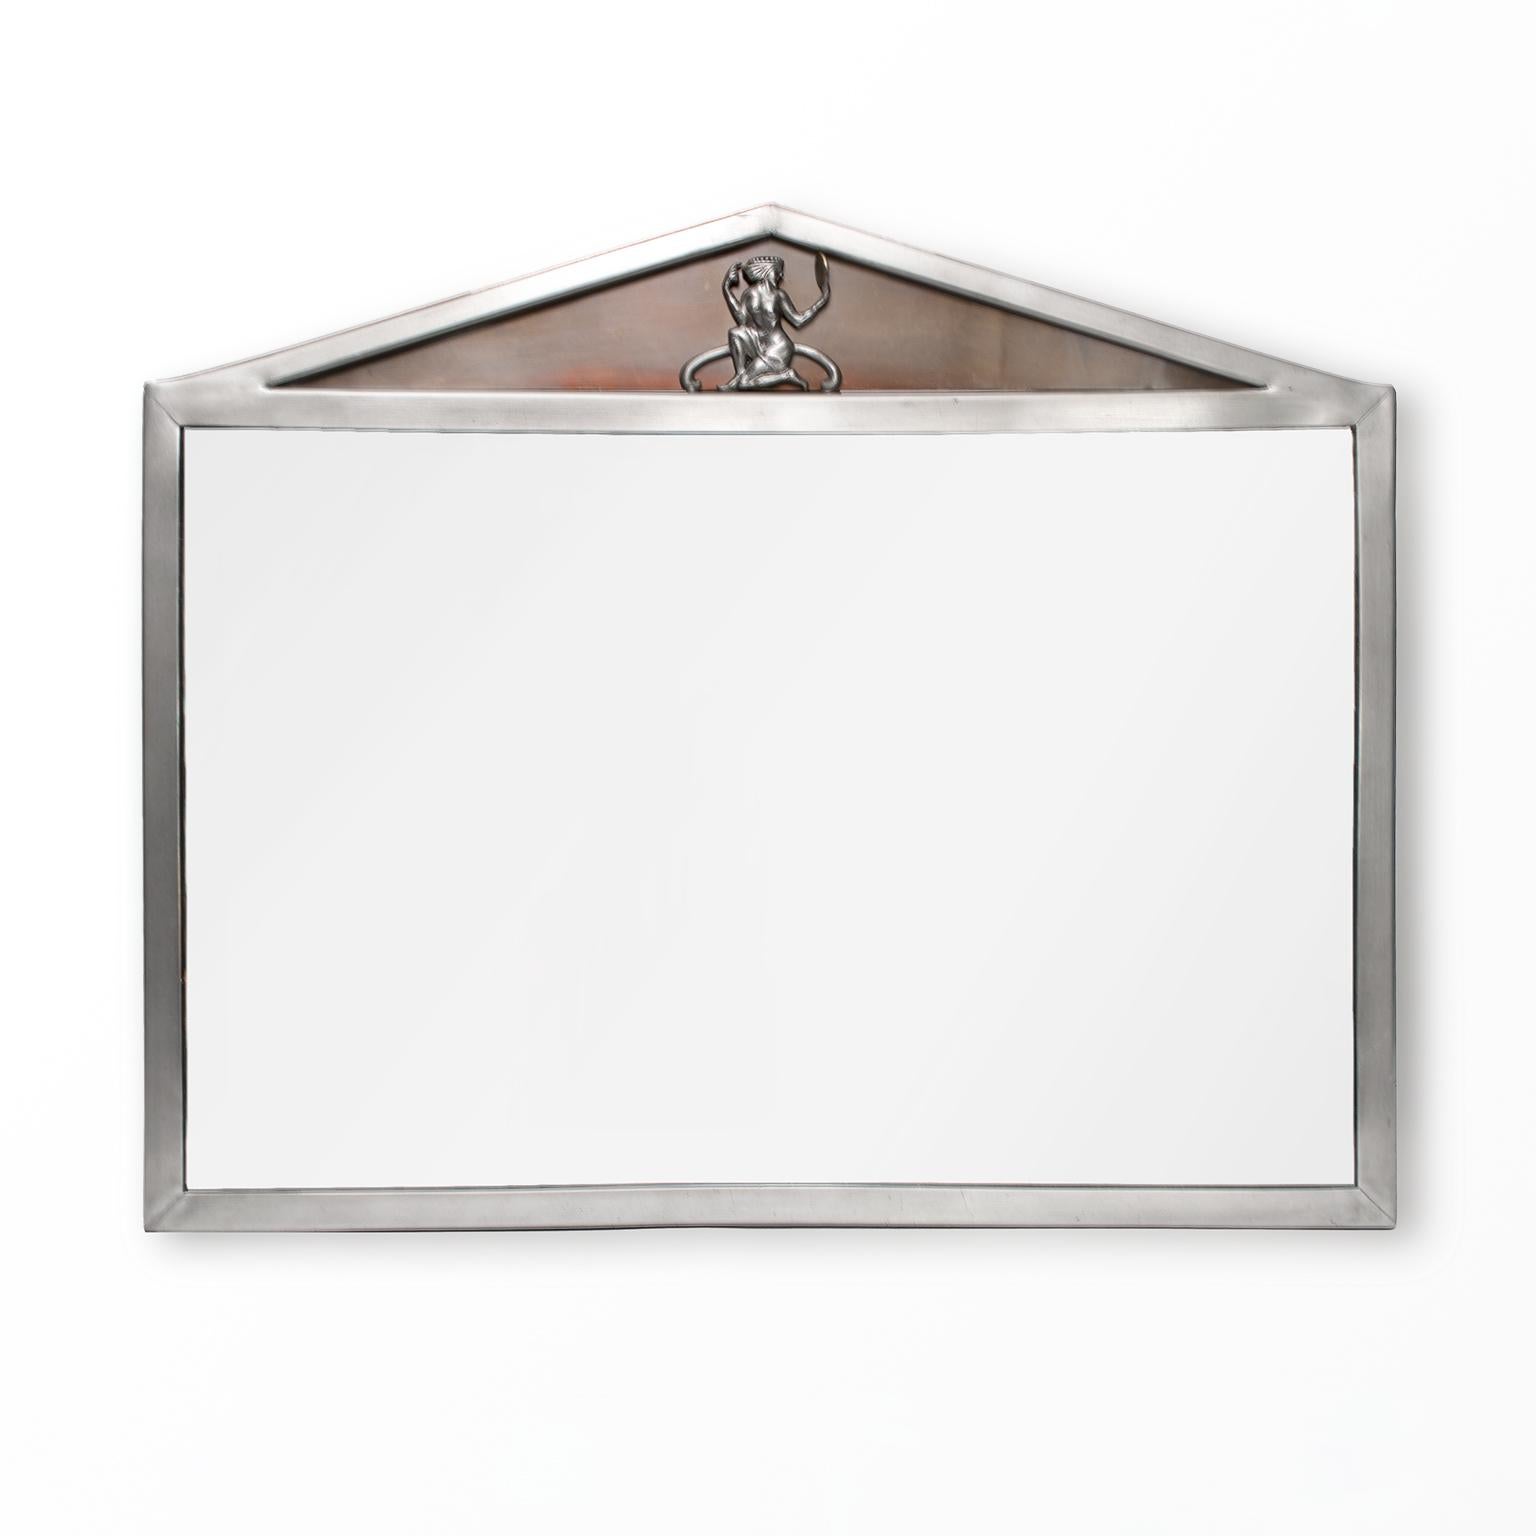 Scandinavian Modern, Swedish Art Deco polished pewter mirror with pediment top which includes a female figure hold a brass mirror. The recessed pediment has a piece of patinated brass. Made by Einar Backstrom, signed on back.

Measures: Height